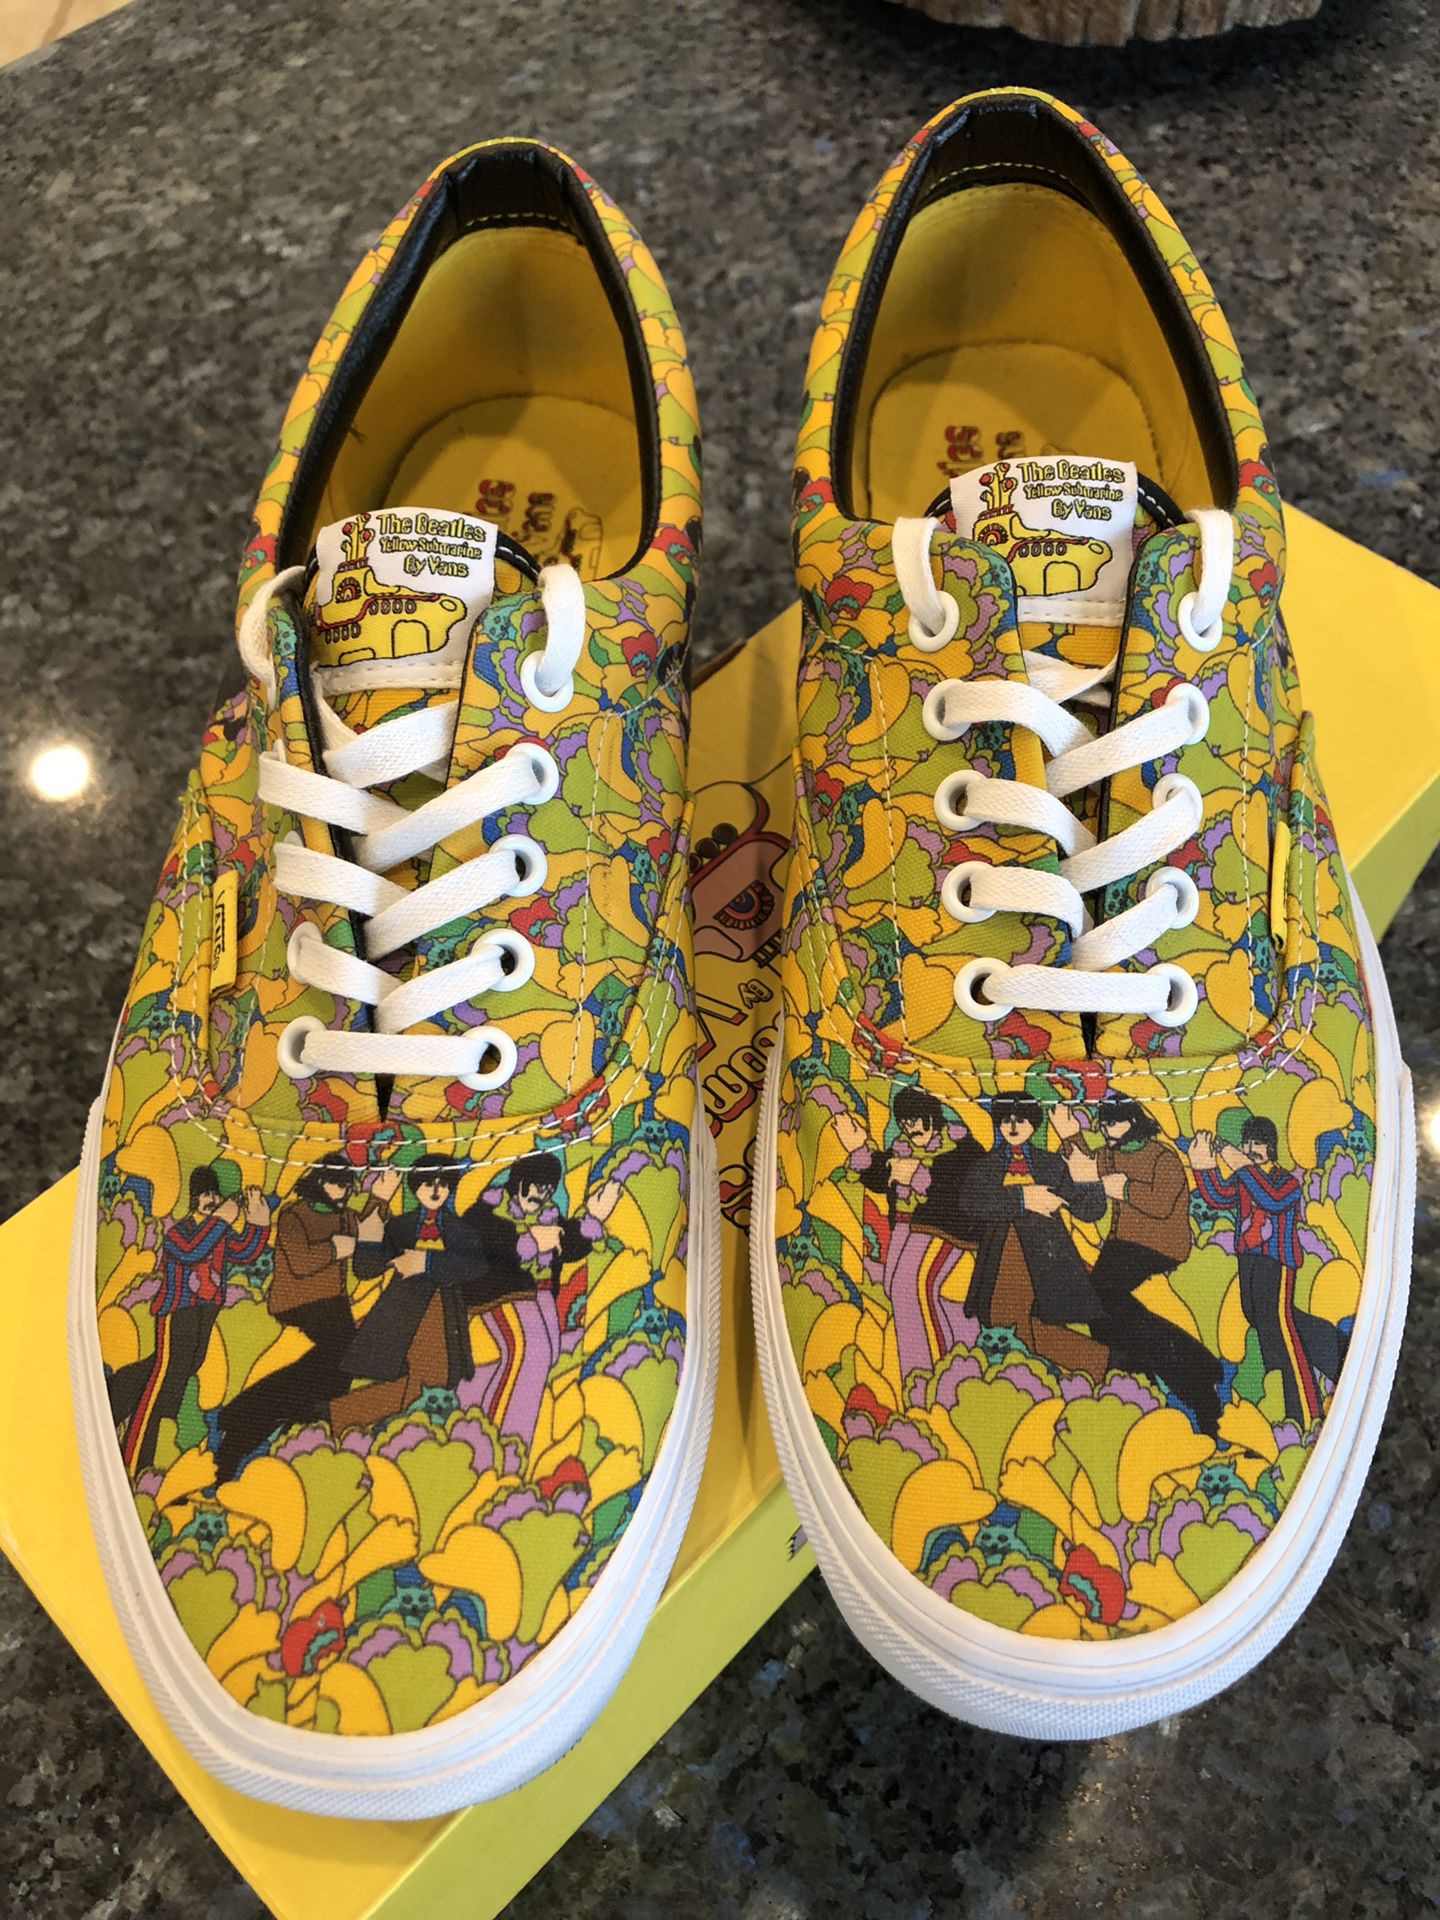 slachtoffer Habitat Hiel Limited Edition | Beatles Yellow Submarine x Vans Collab Shoes - Size 11.5  for Sale in Simi Valley, CA - OfferUp